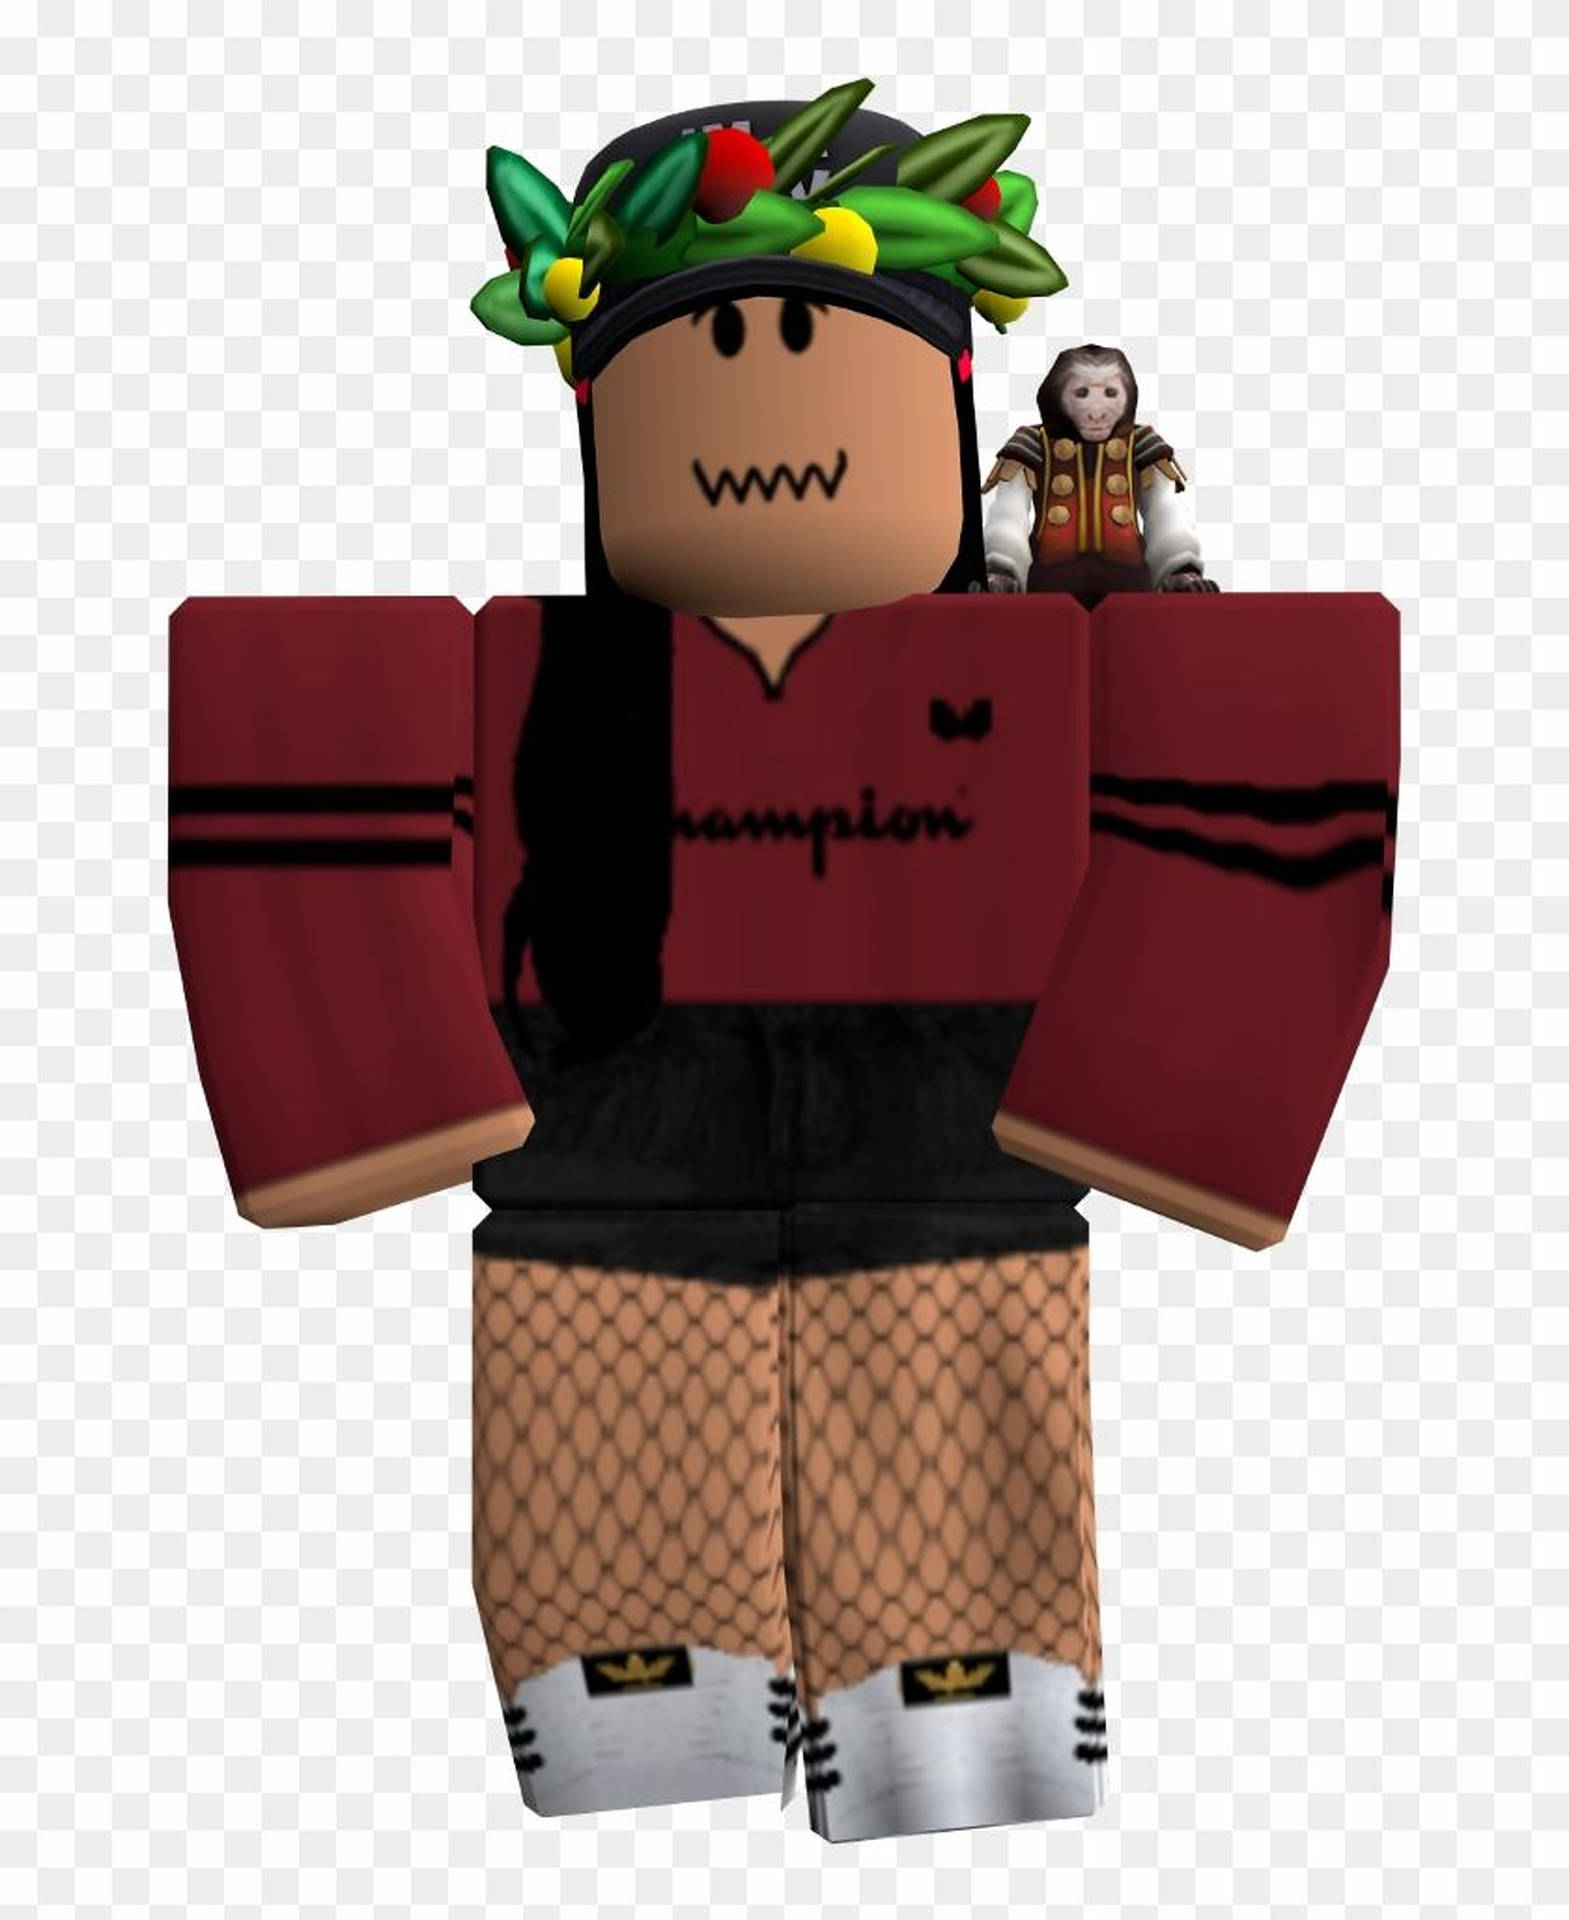 Roblox Girl With Monkey Wallpaper